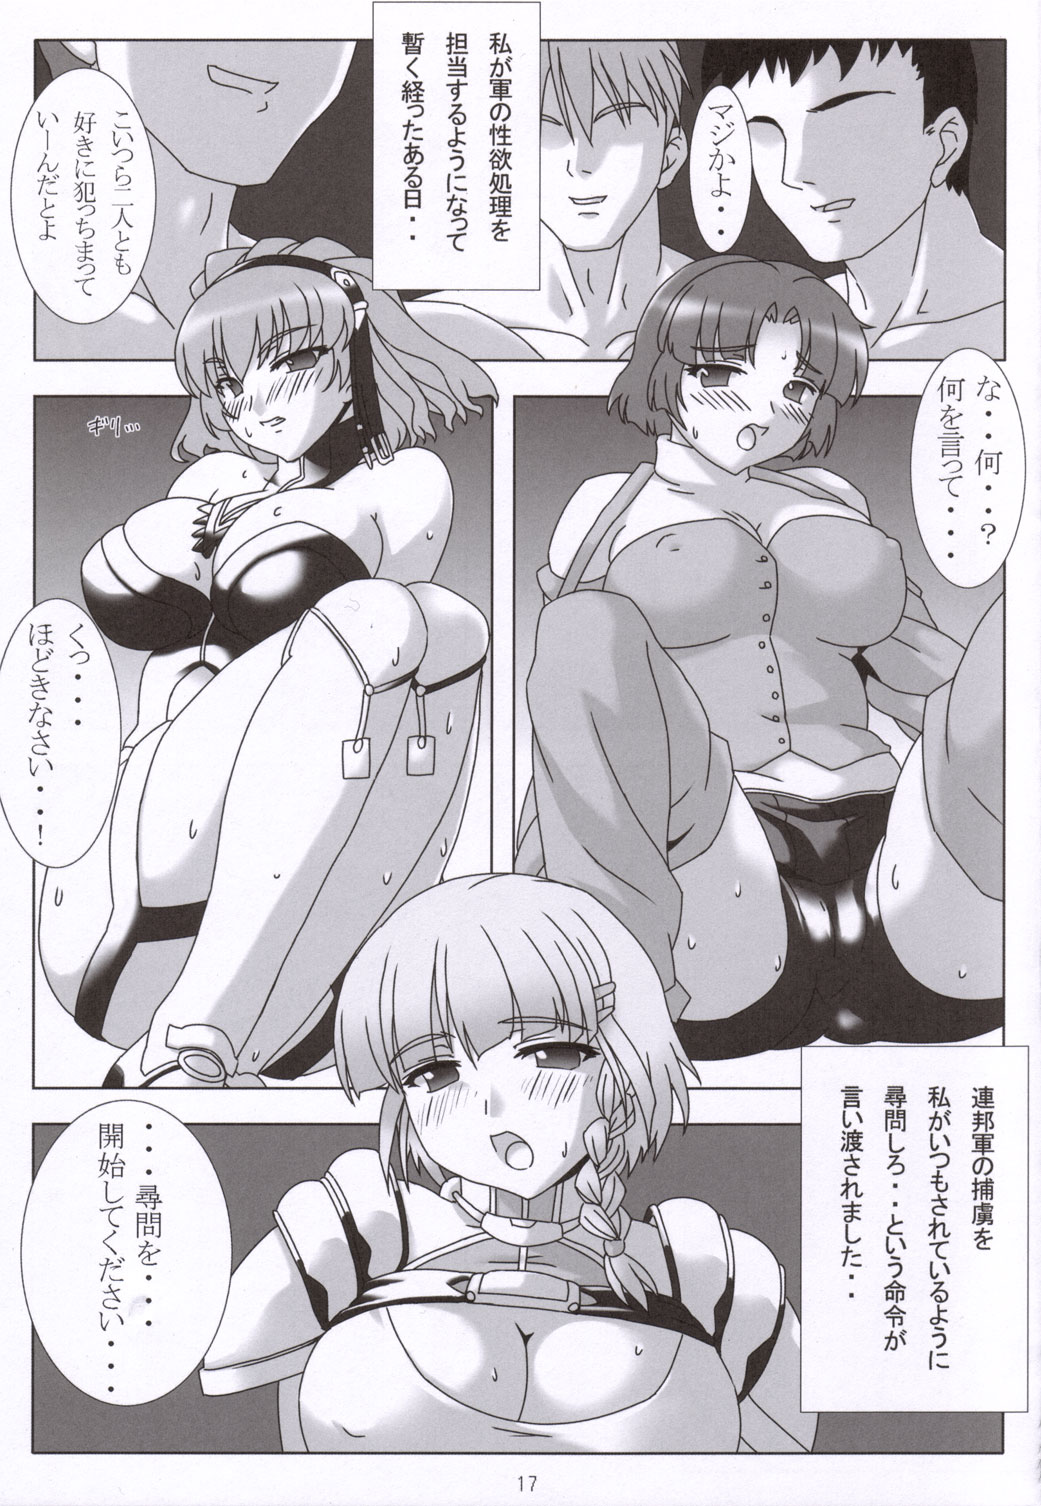 (C69) [NF121 (Midori Aoi)] SILVER -recollect- (Super Robot Wars) page 16 full